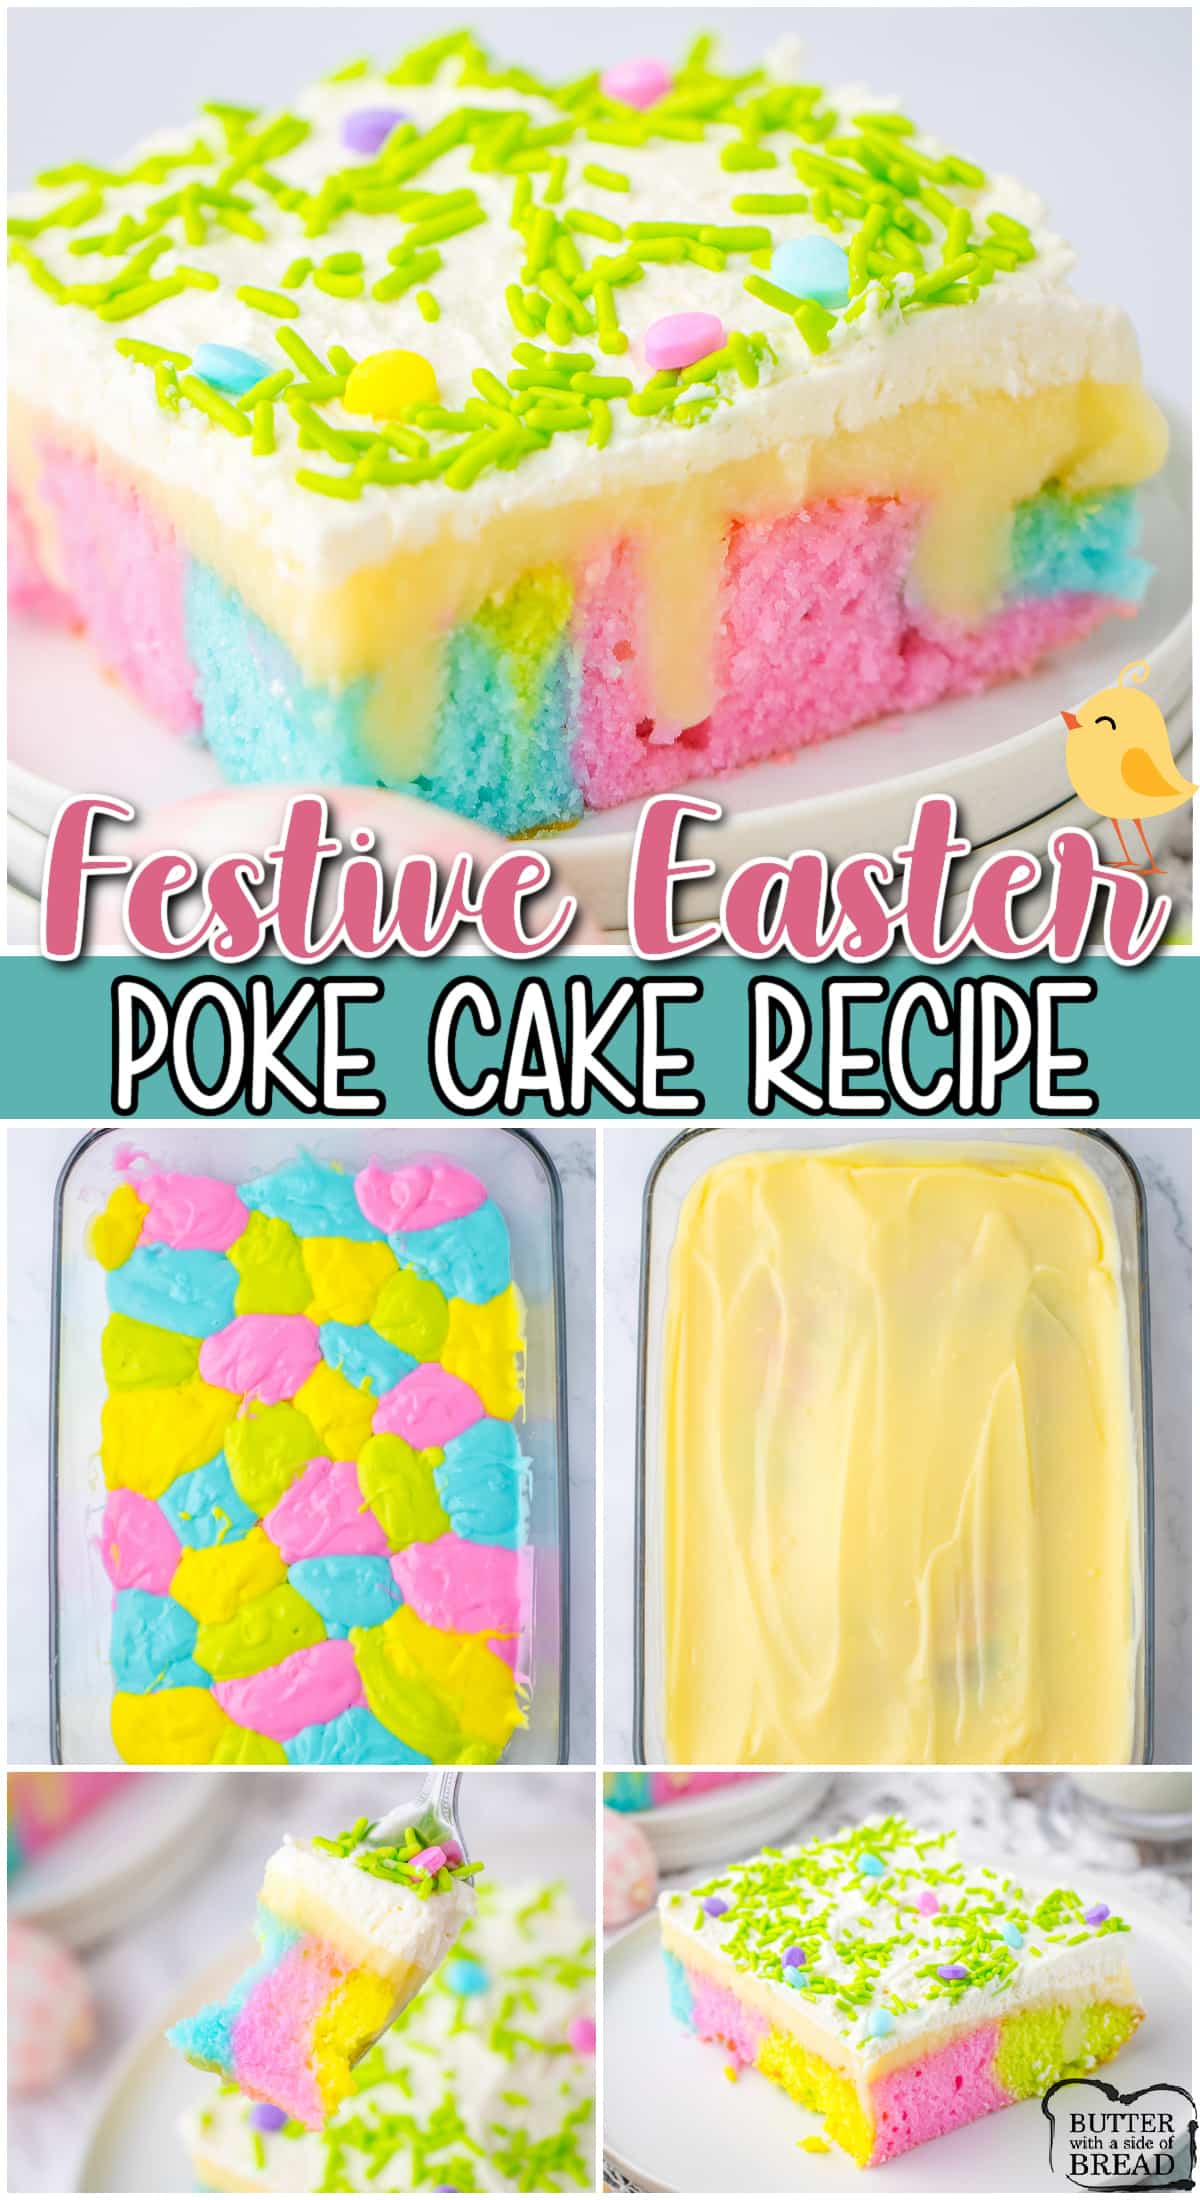 Festive Easter Poke Cake starts with a cake mix which is baked & poked, layered with a white chocolate pudding & topped with a sweetened whipped cream and sprinkles! This colorful and flavorful pudding poke cake is perfect for any Easter celebration, and it's incredibly easy to make.